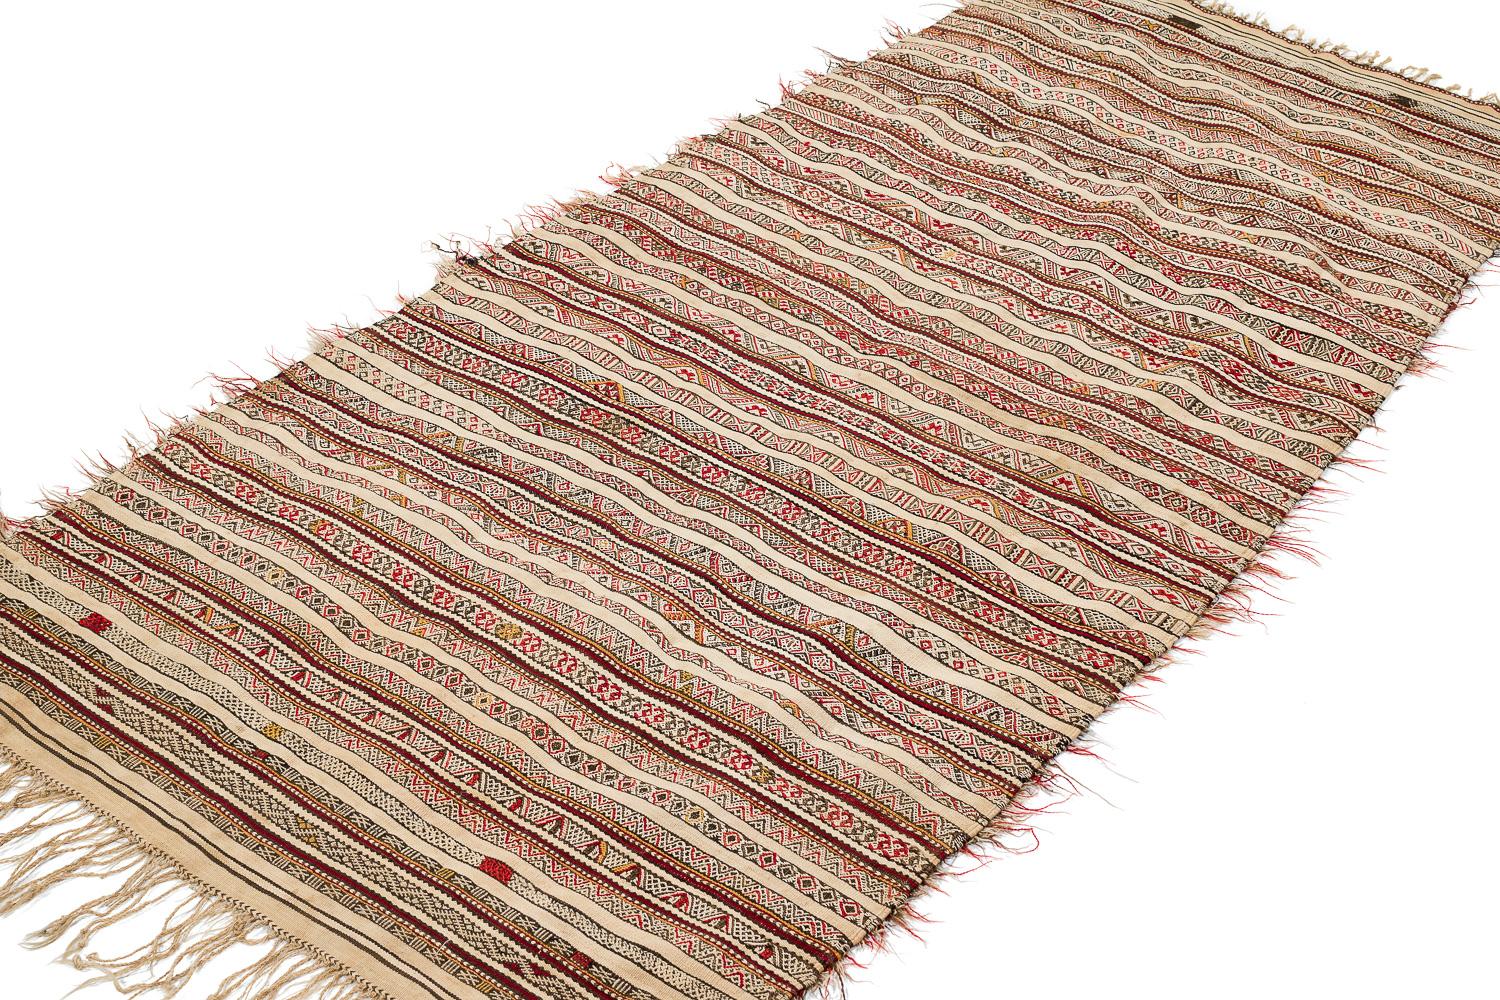 This piece is a women’s ceremonial shawl from the central Beni Ouarain region in the north-eastern Middle Atlas. The specific term in the regional Berber language is either tabrdouhte.

The key fatures for this type of textile are: the design